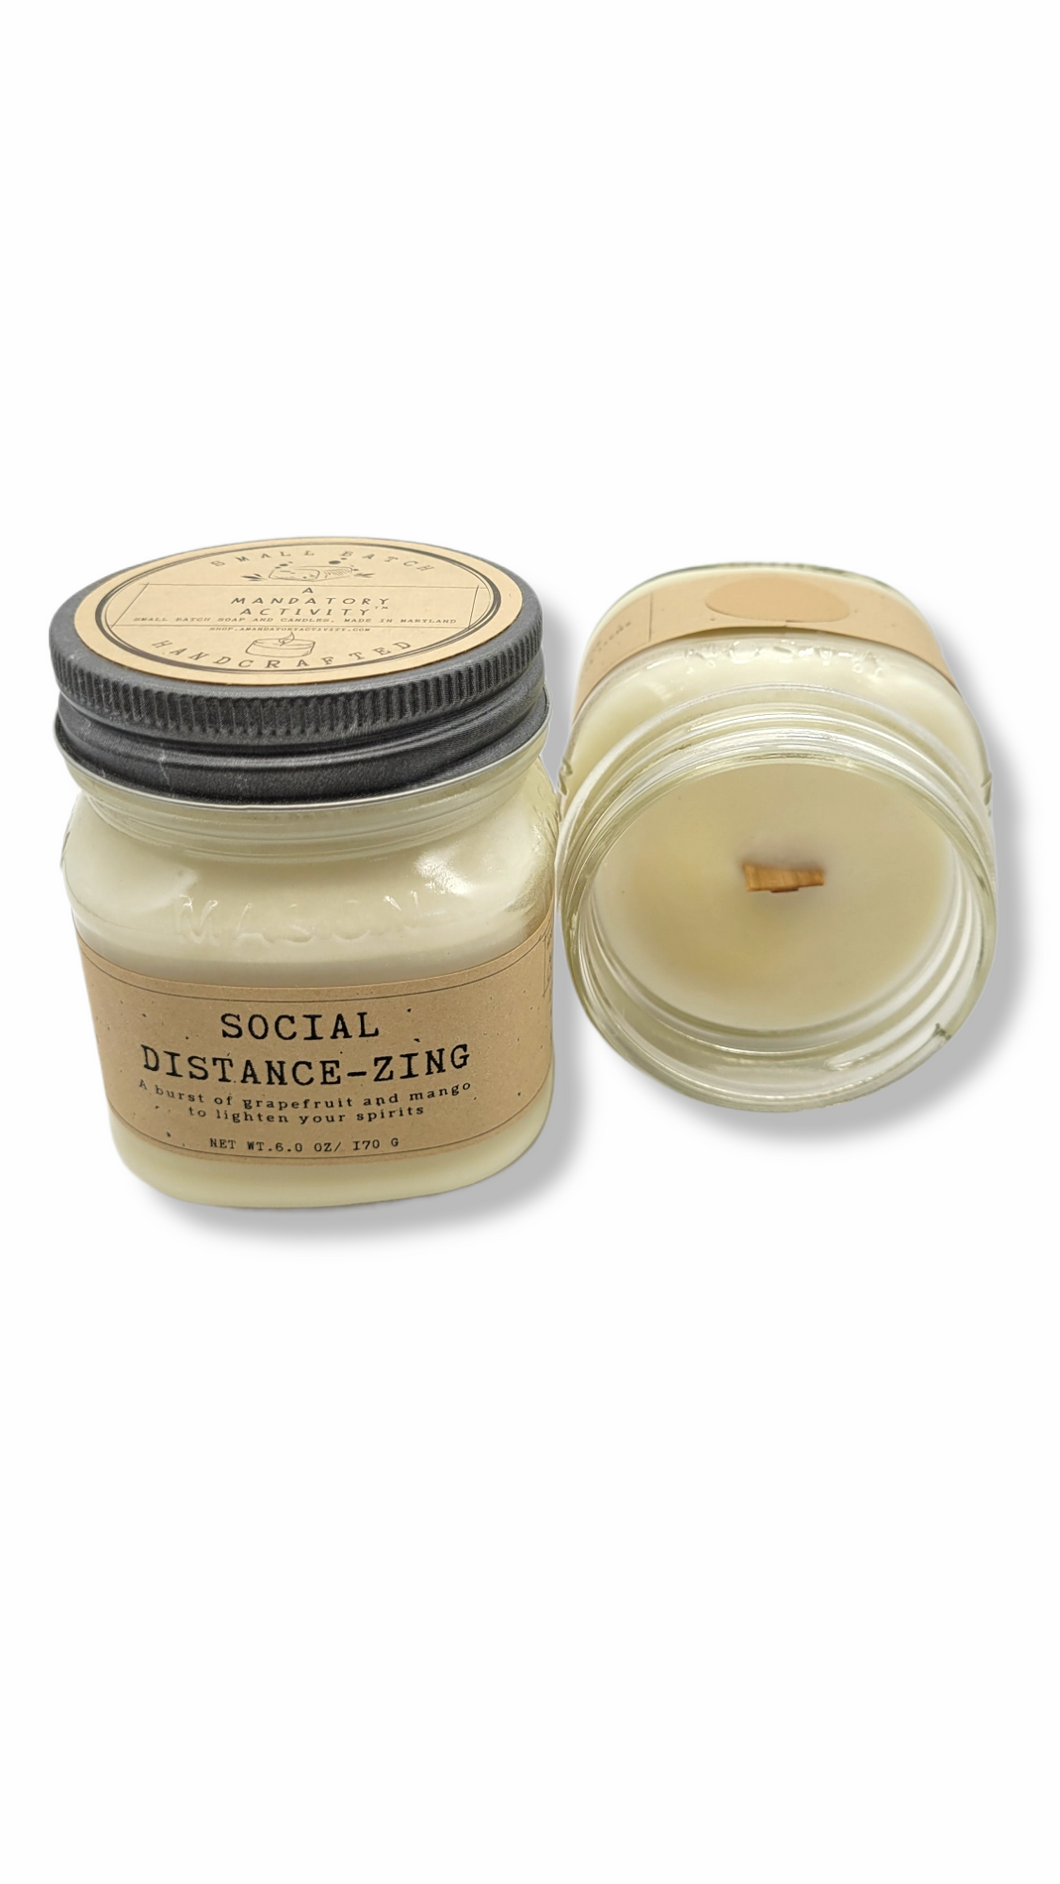 Social Distance-zing - Mango & Grapefruit (Soy Wood Wick Candle) - The Naked Soaps Co